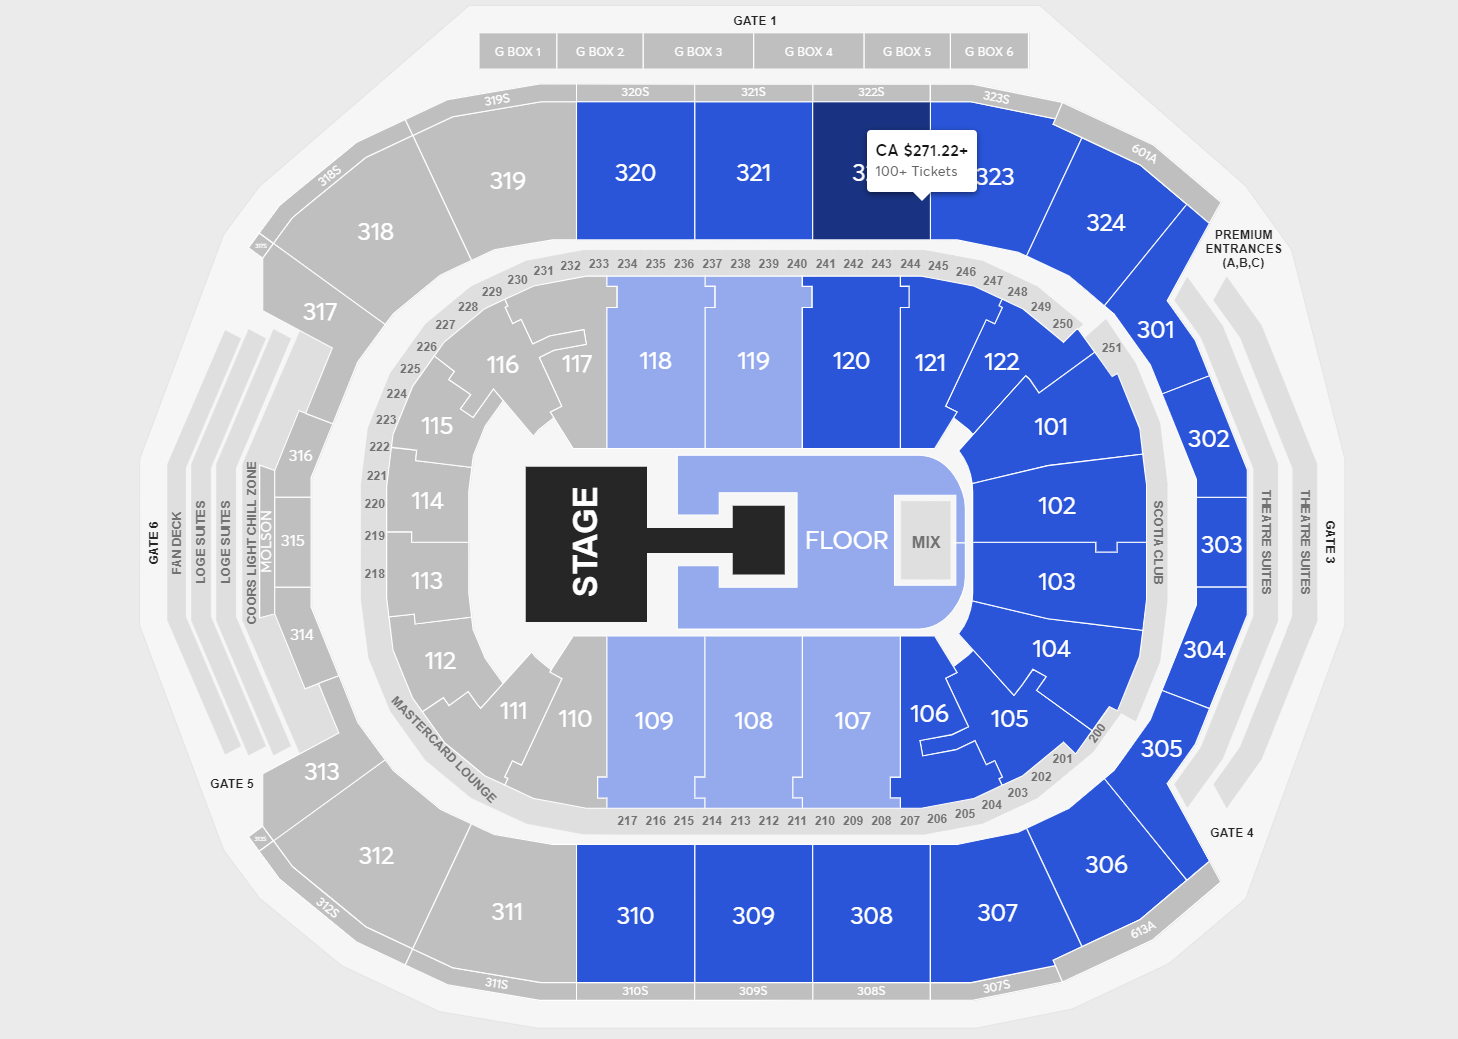 Official Platinum tickets in the lower bowl are priced around CA $926